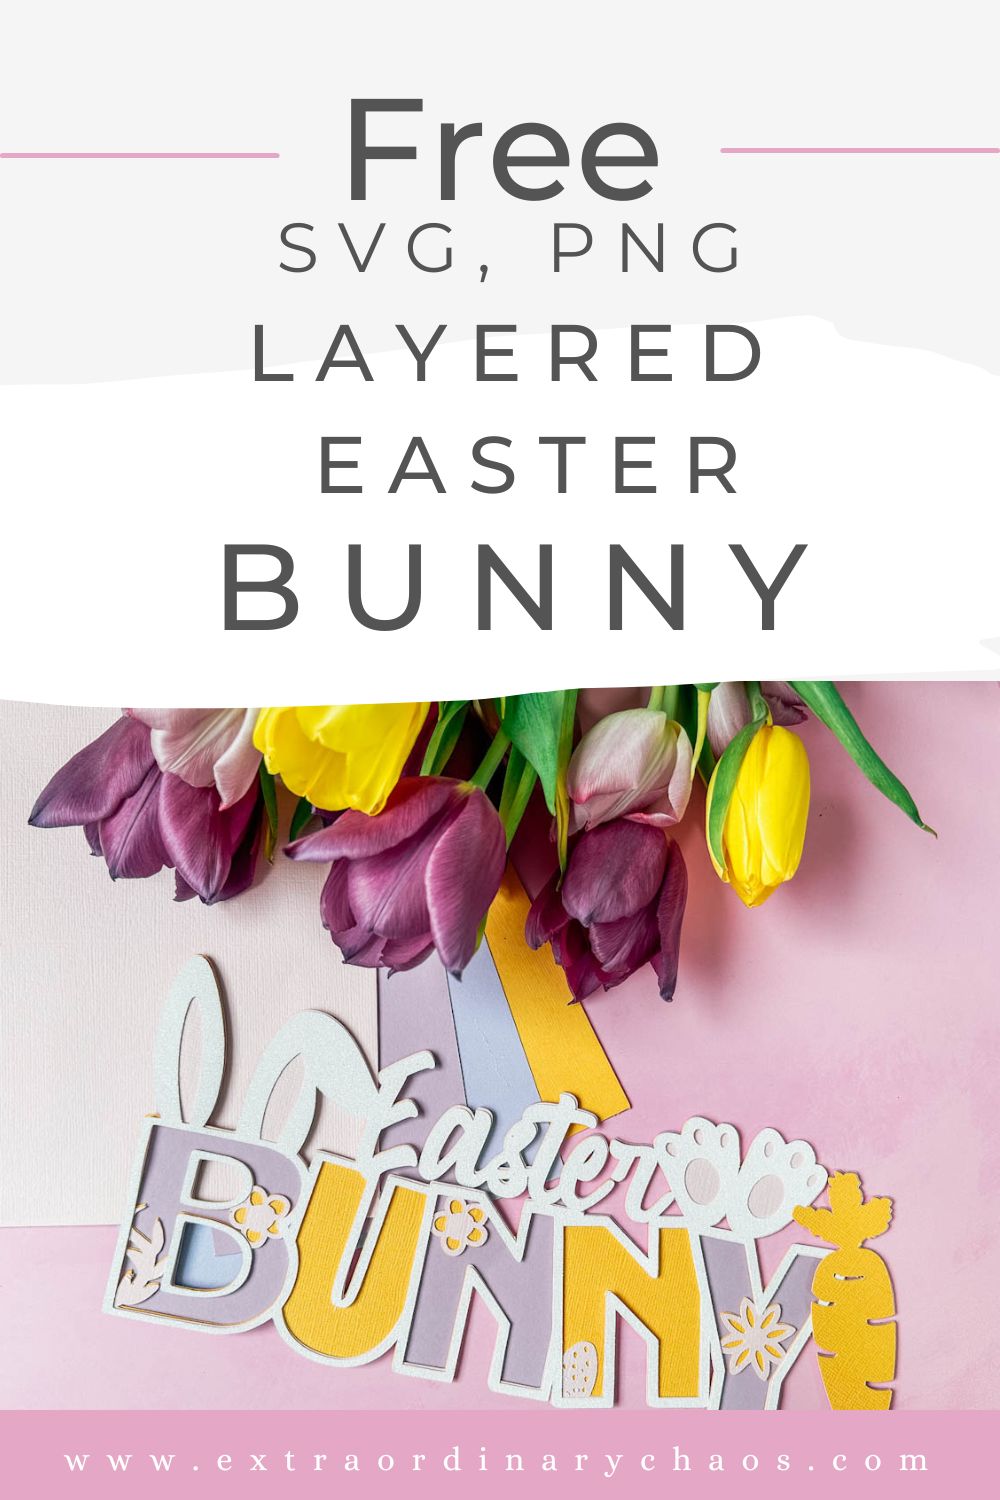 Free SVG PNG layered Easter Bunny for Easter crafts with Cricut, Silhouette, xTool and Glowforge